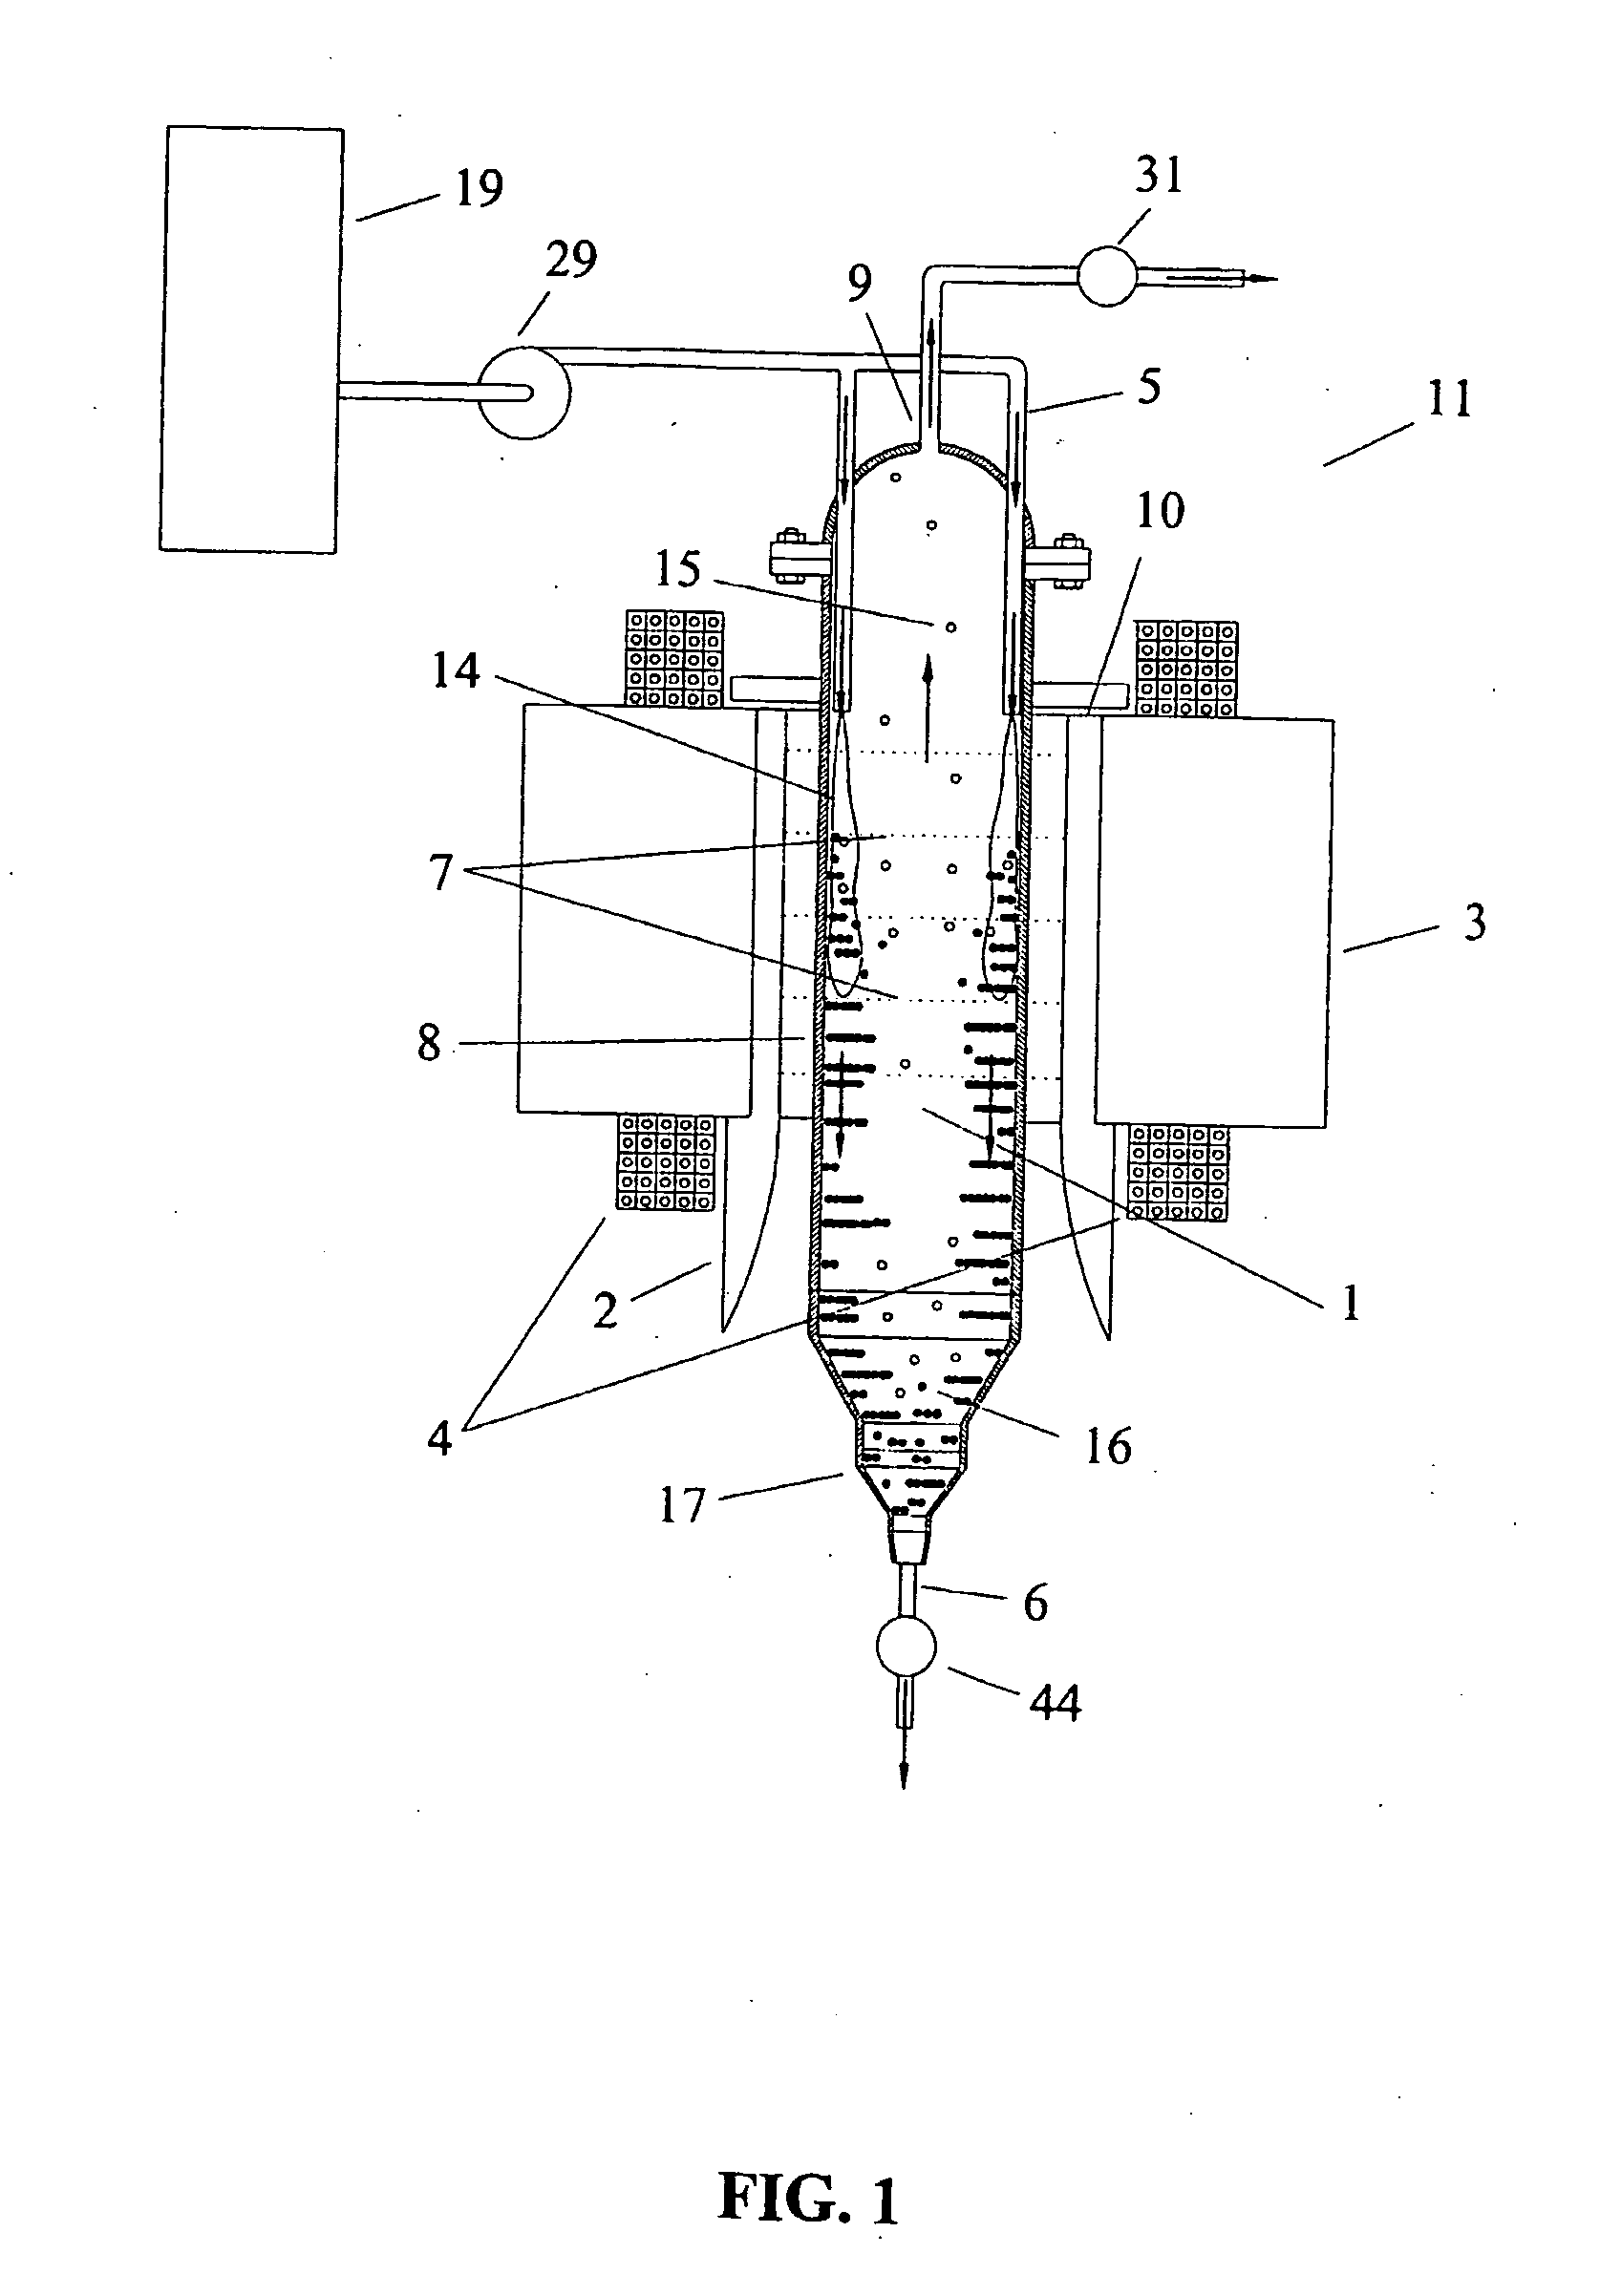 Apparatus and method for continuous separation of magnetic particles from non-magnetic fluids